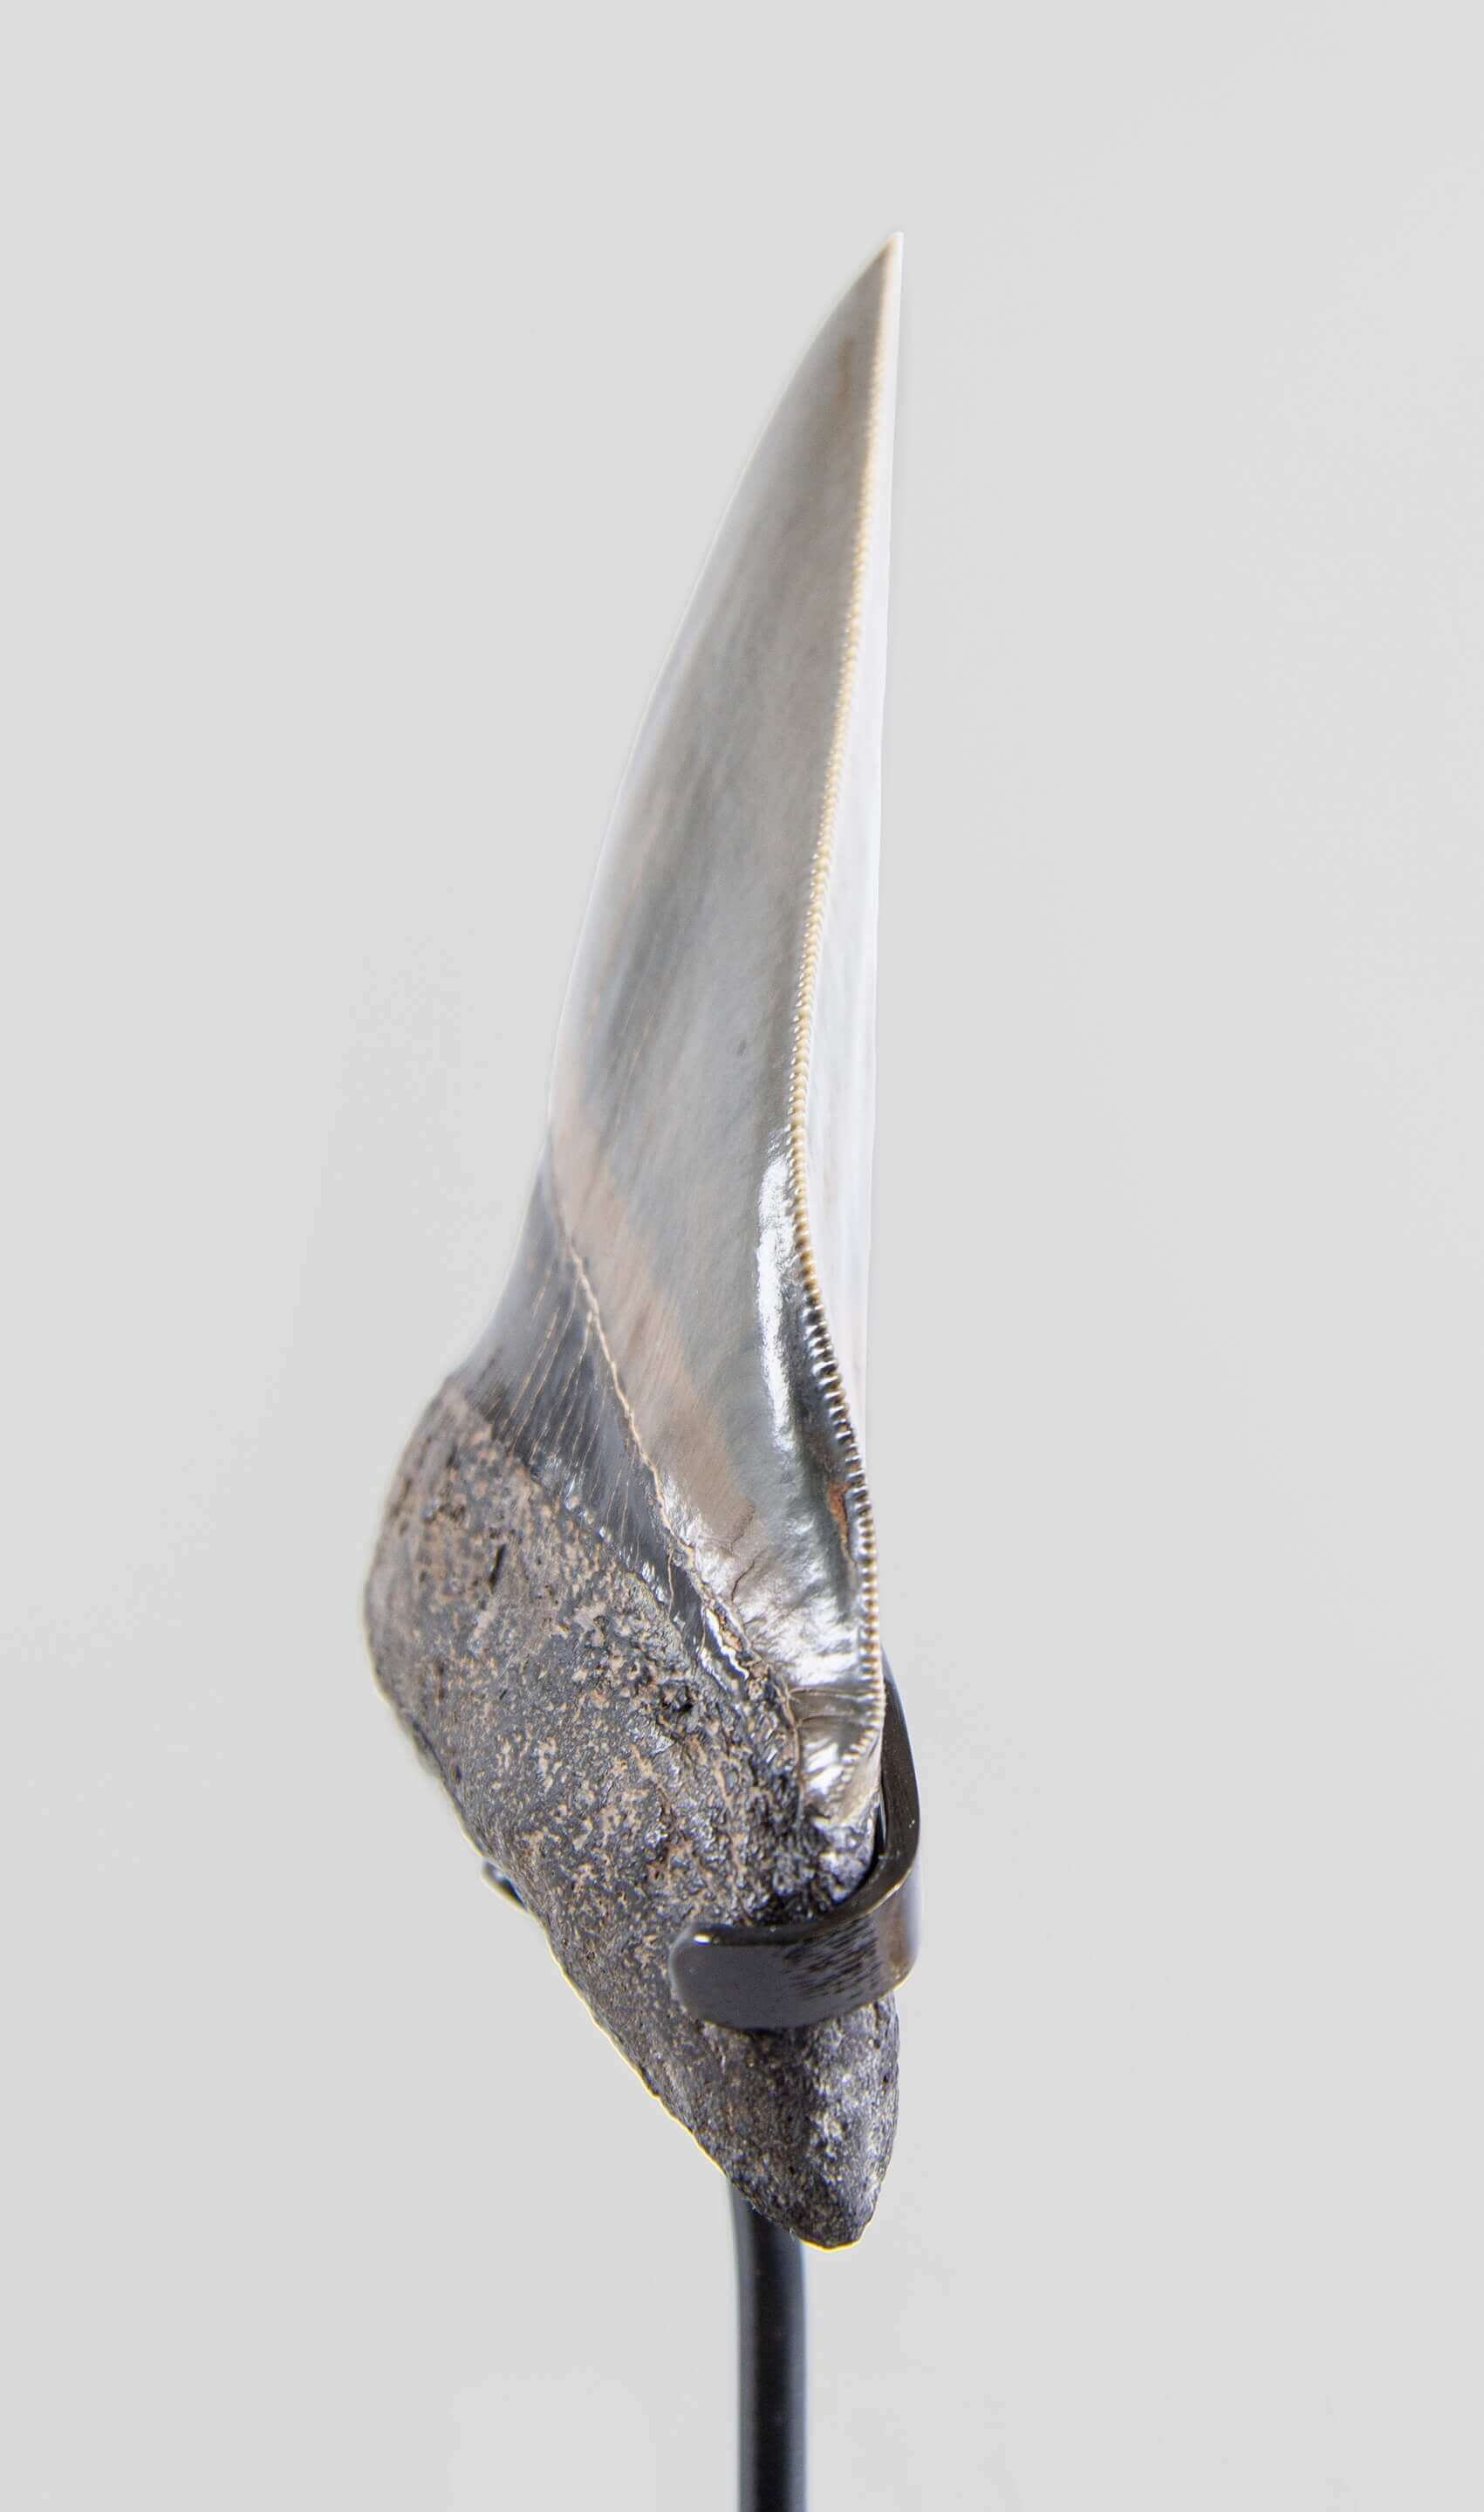 Fossil Megalodon Carcharodon Tooth 5.11"